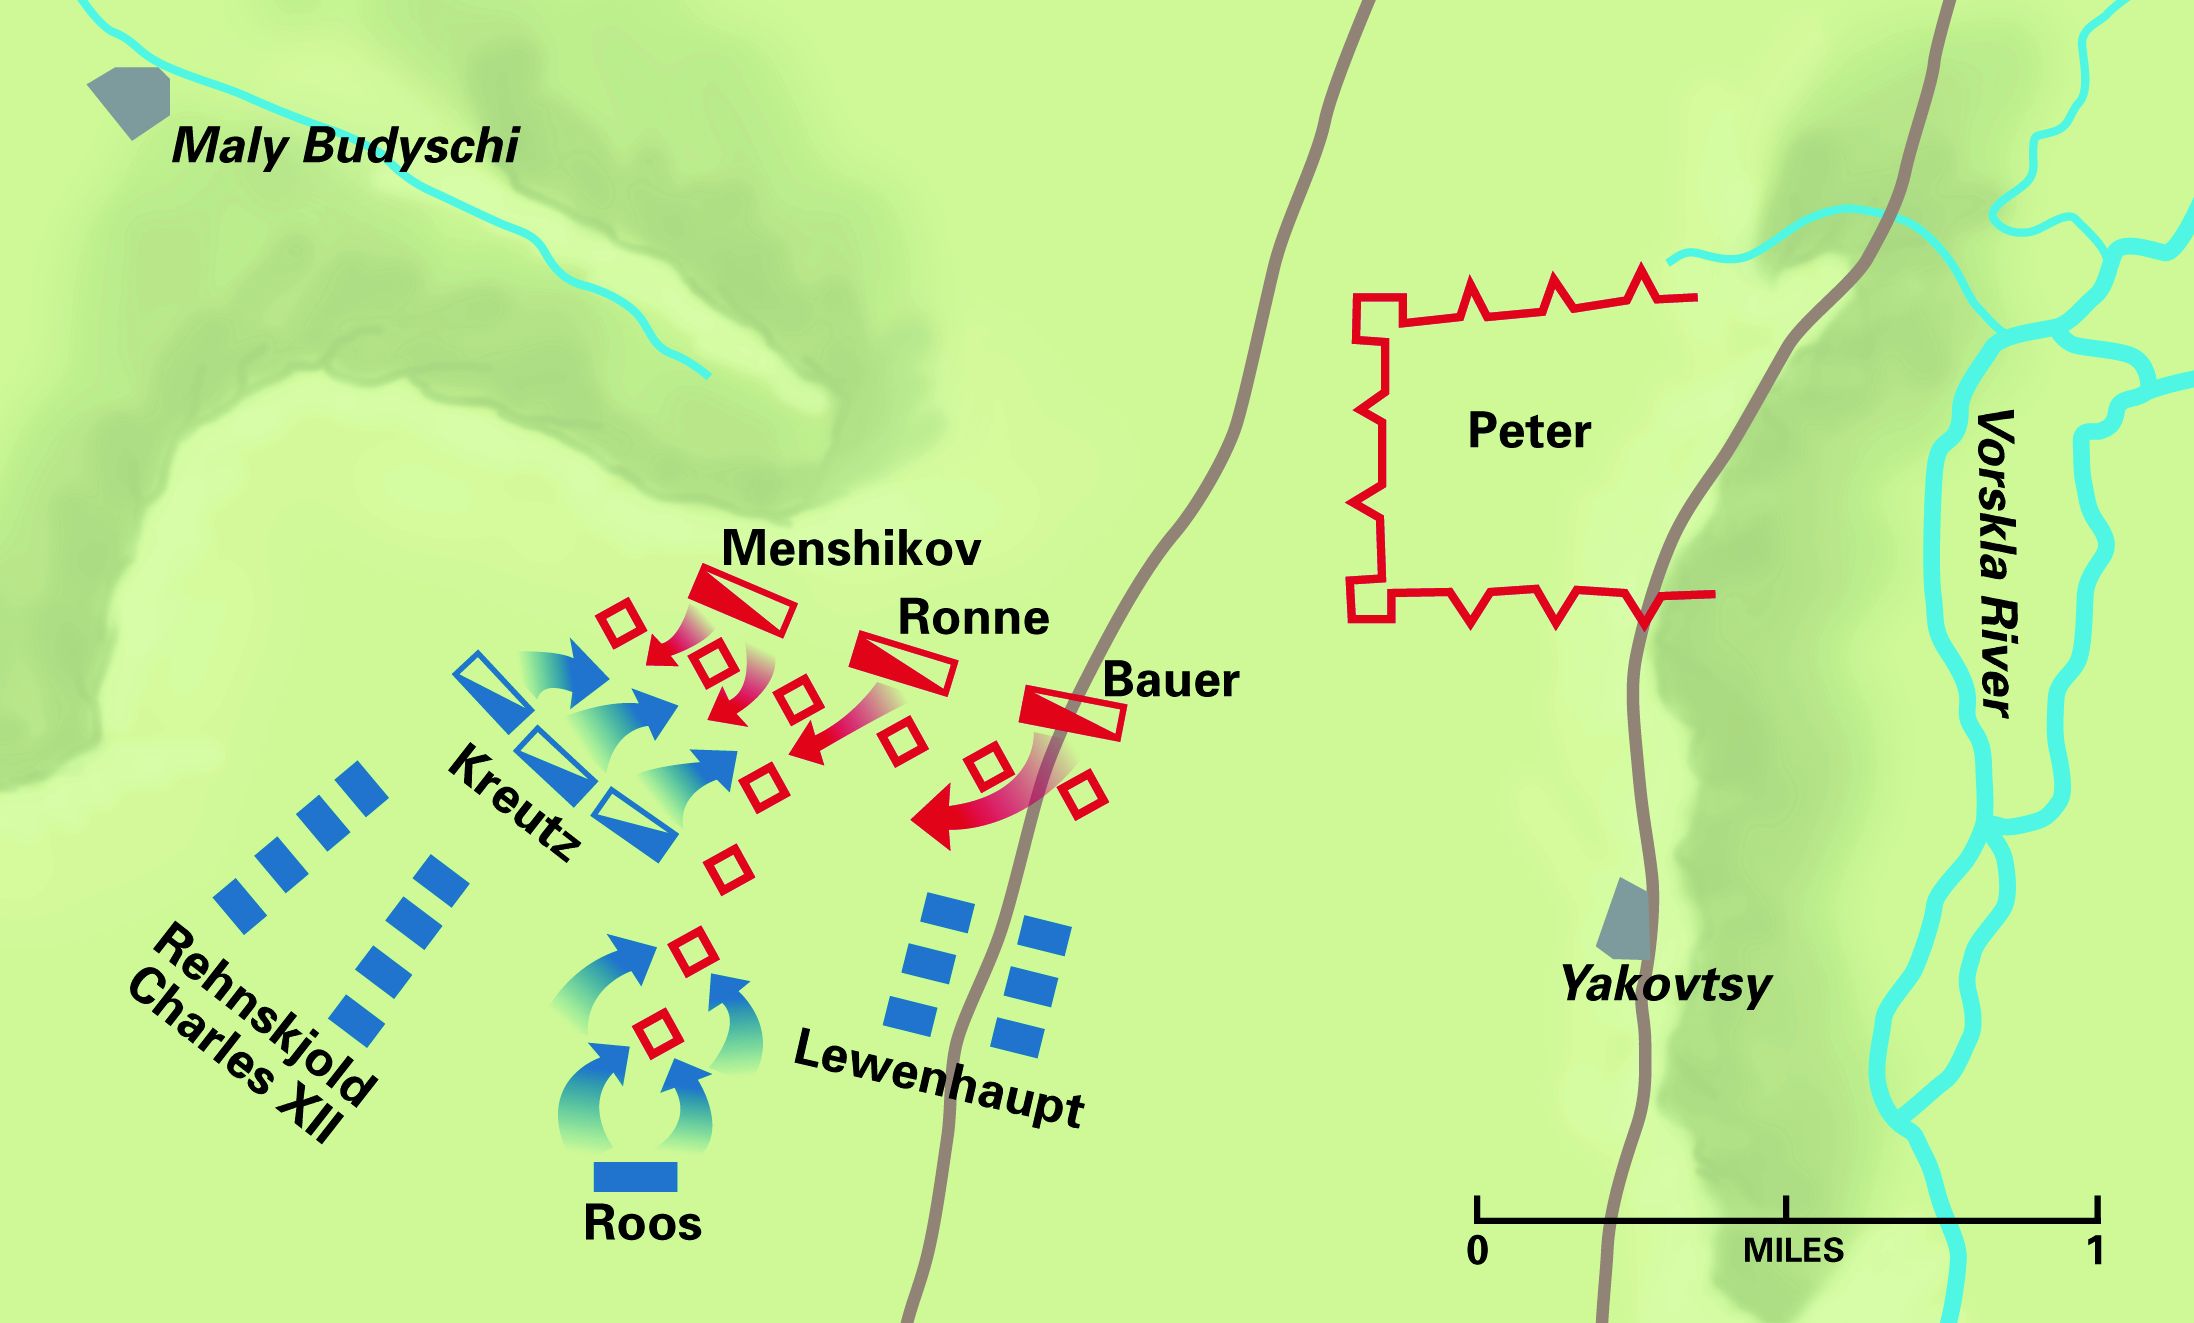 When the Swedes attacked at Poltava, the  Russians were working on four new redoubts—small forts manned by  several hundred men and one or two cannon—with the new line at right angles to the original six to form a “T” shape. These new redoubts were designed to divide the Swedish attack. The Russian earthworks are at right.  The Russians outnumbered the forces of Charles XII by more than 3 to 1 in men and 70 to 4 in cannon.